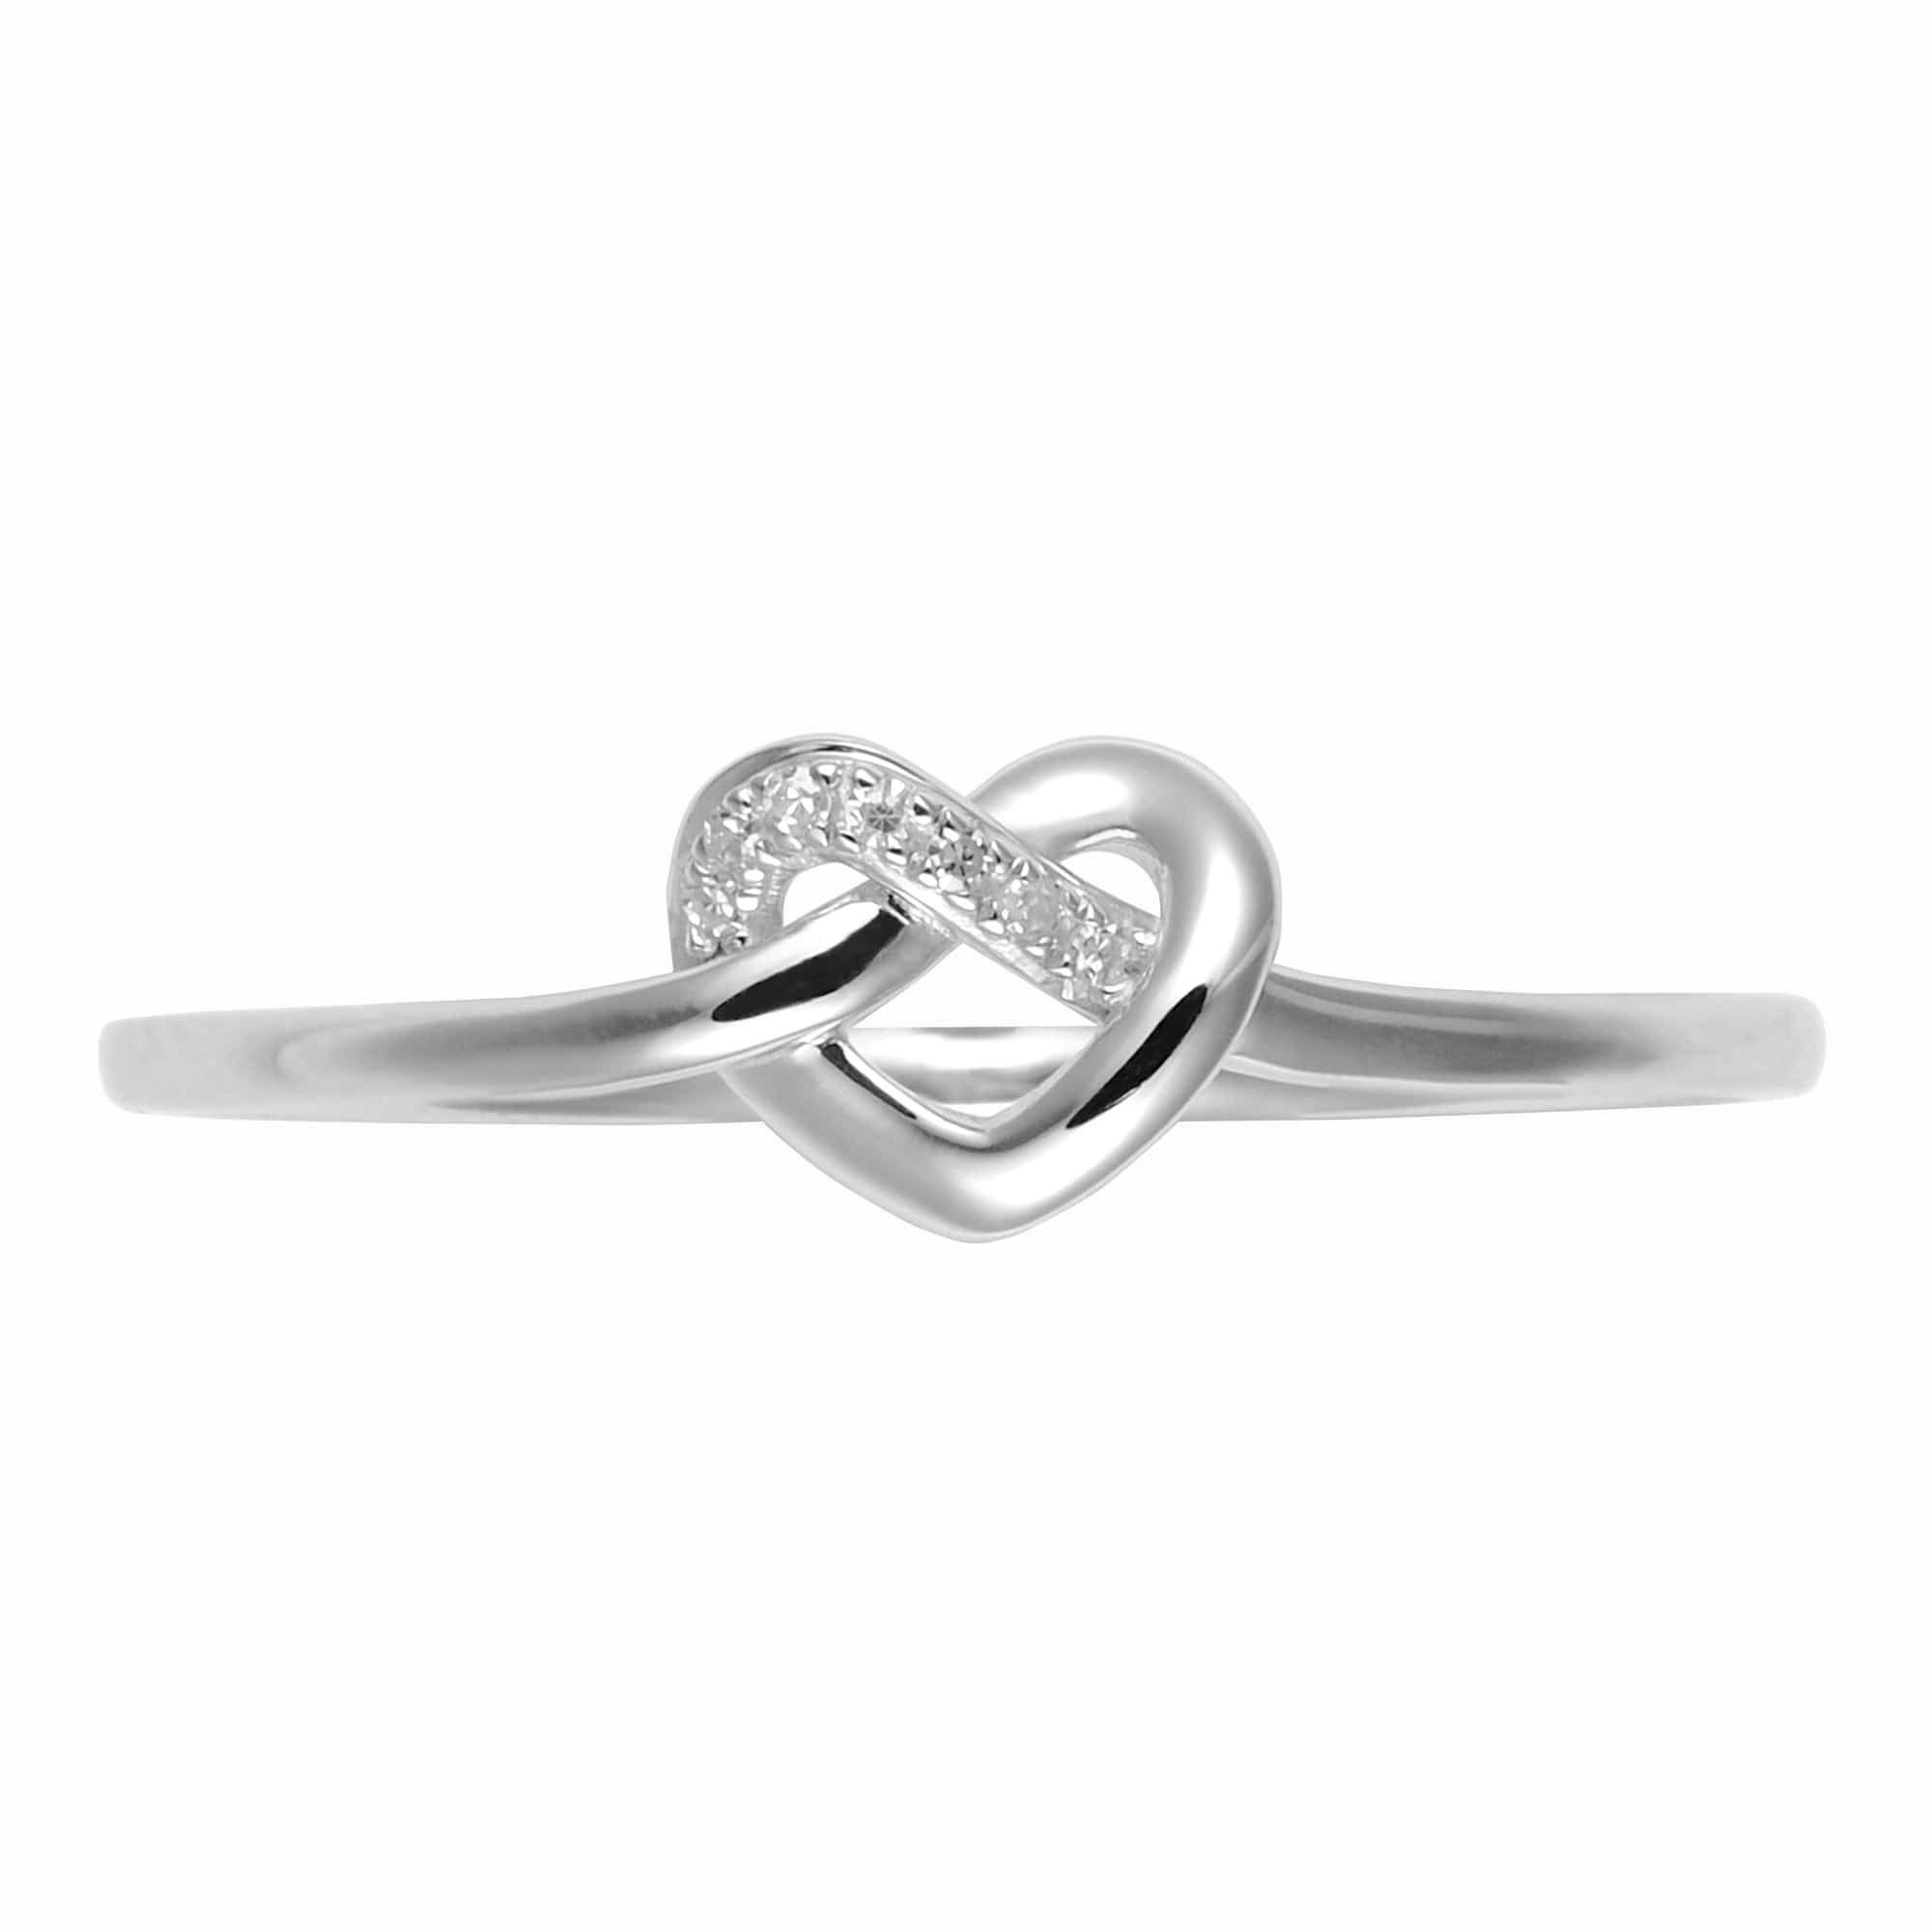 60292R011 Classic Round Diamond Heart Knot Ring in 9ct White Gold 1